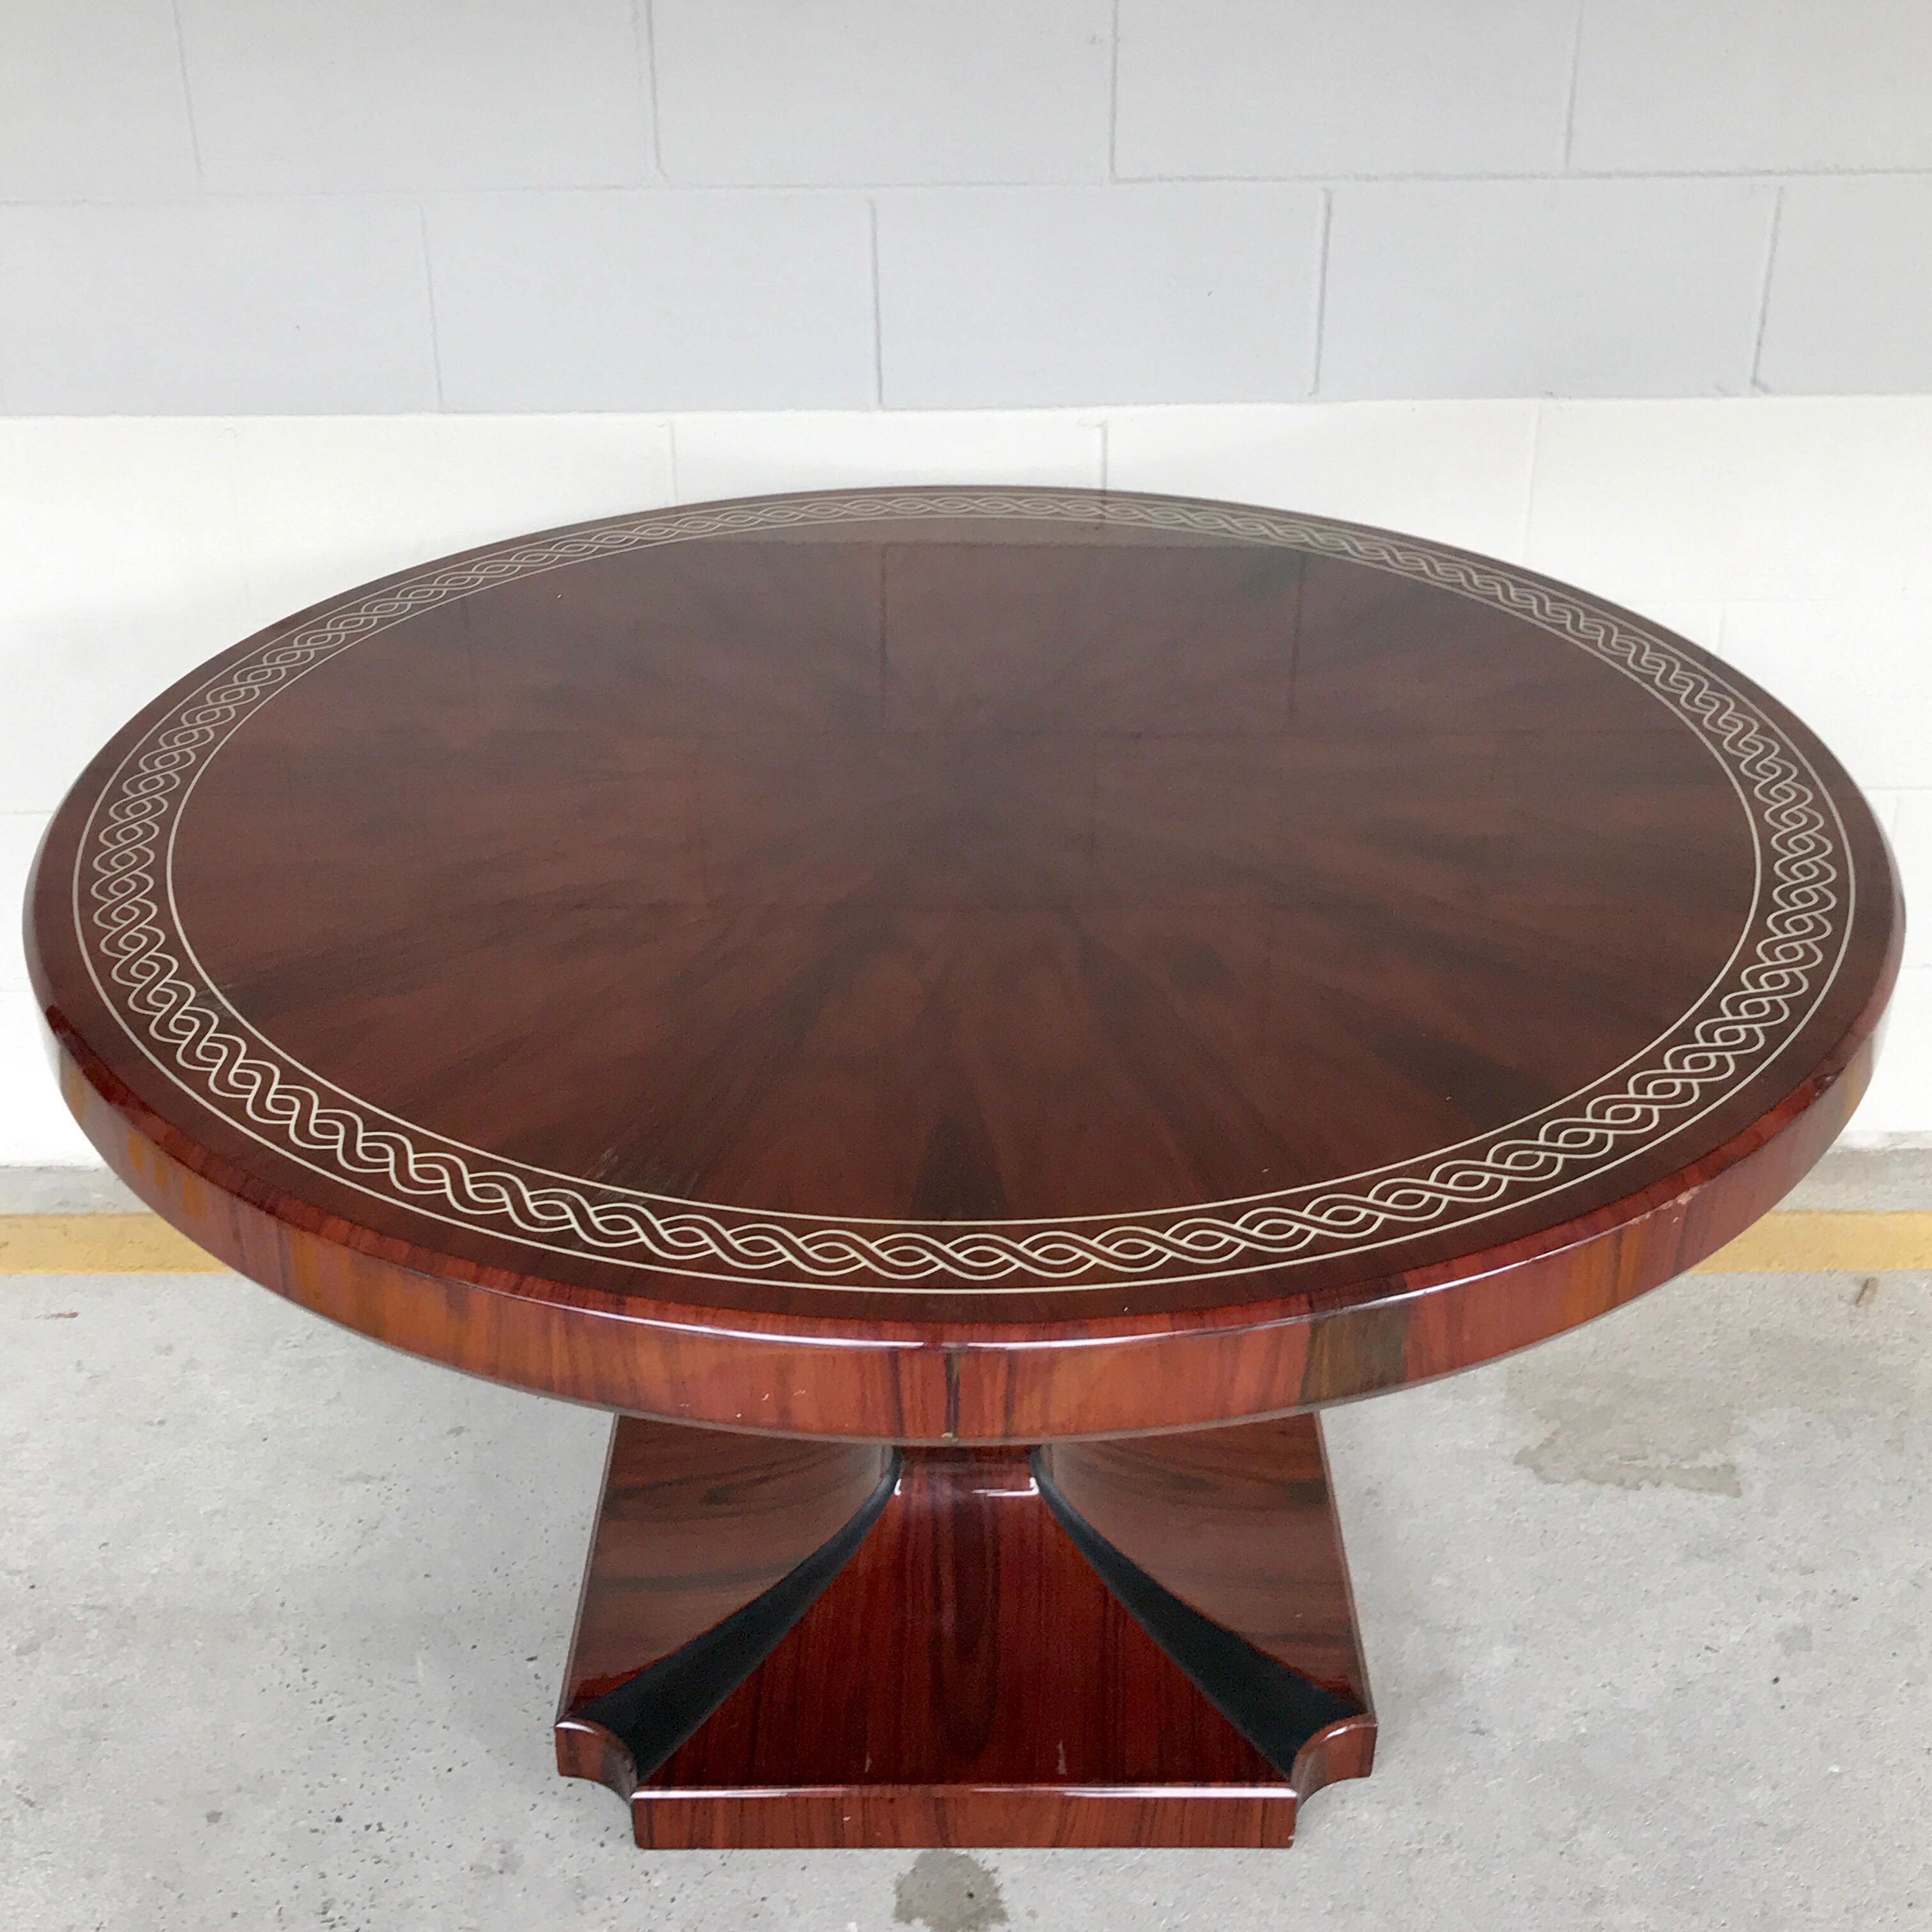 Art Deco style rosewood centre table with lacquer inlay, the circular top raised on a tapered urn pedestal base with inlaid ebony. Constructed in two pieces, the top is removable for shipping.